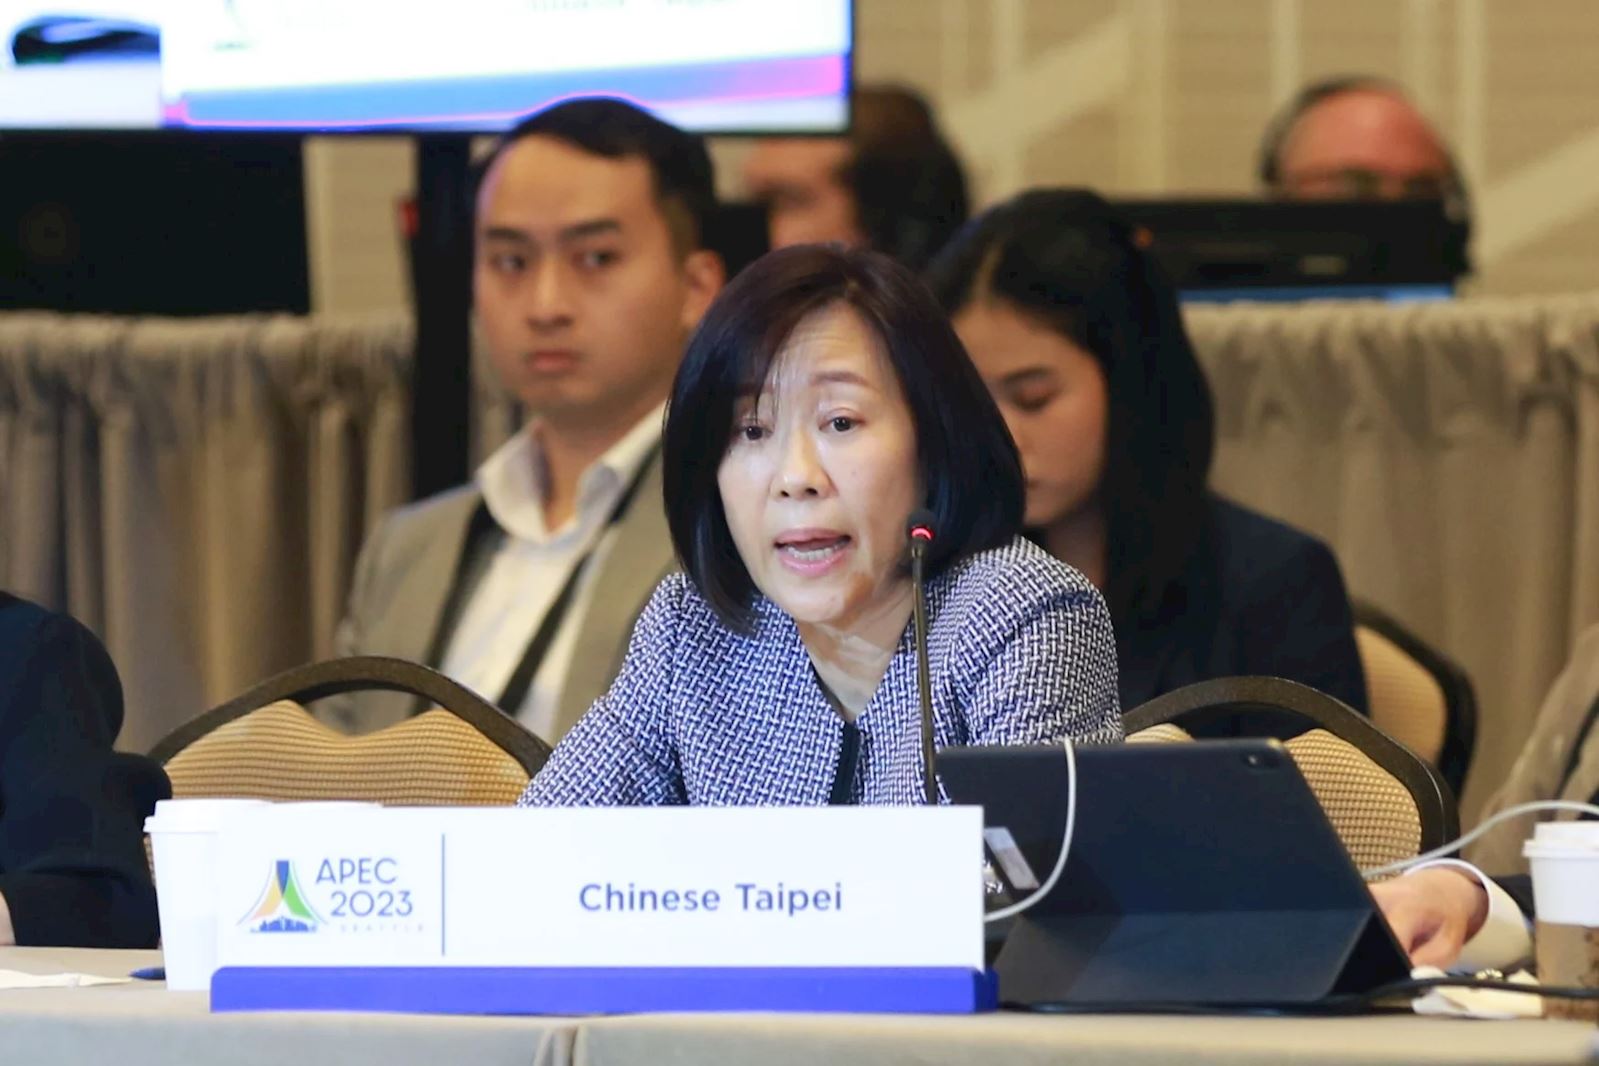 BOFT Director General Cynthia Kiang speaks on Interconnectedness at APEC 2023 Senior Officials’ Meeting (SOM3)